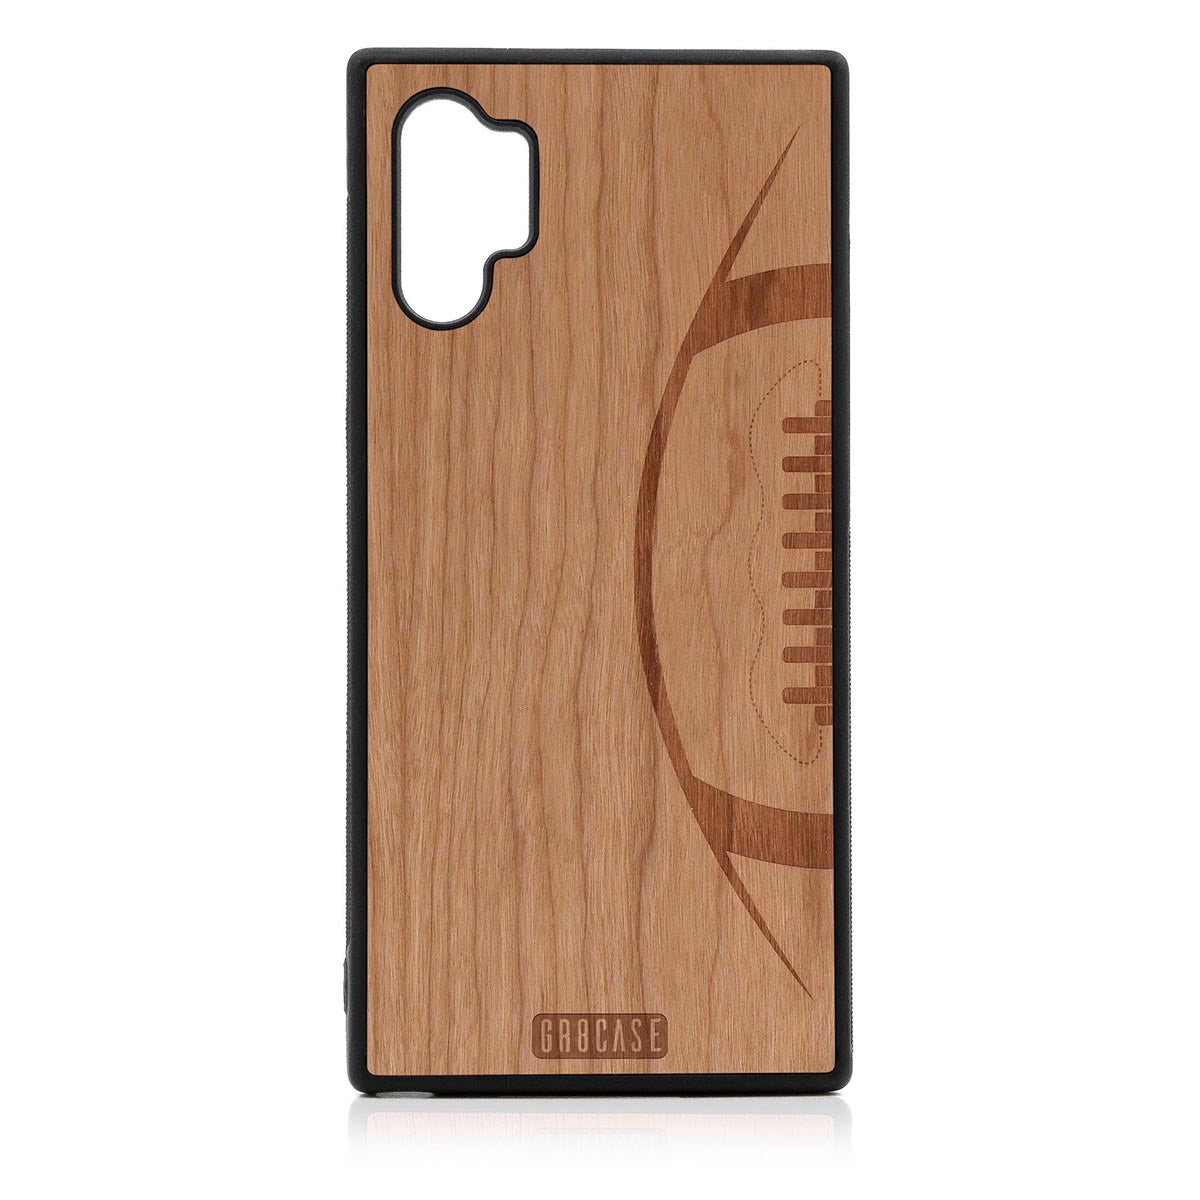 Football Design Wood Case For Samsung Galaxy Note 10 Plus by GR8CASE